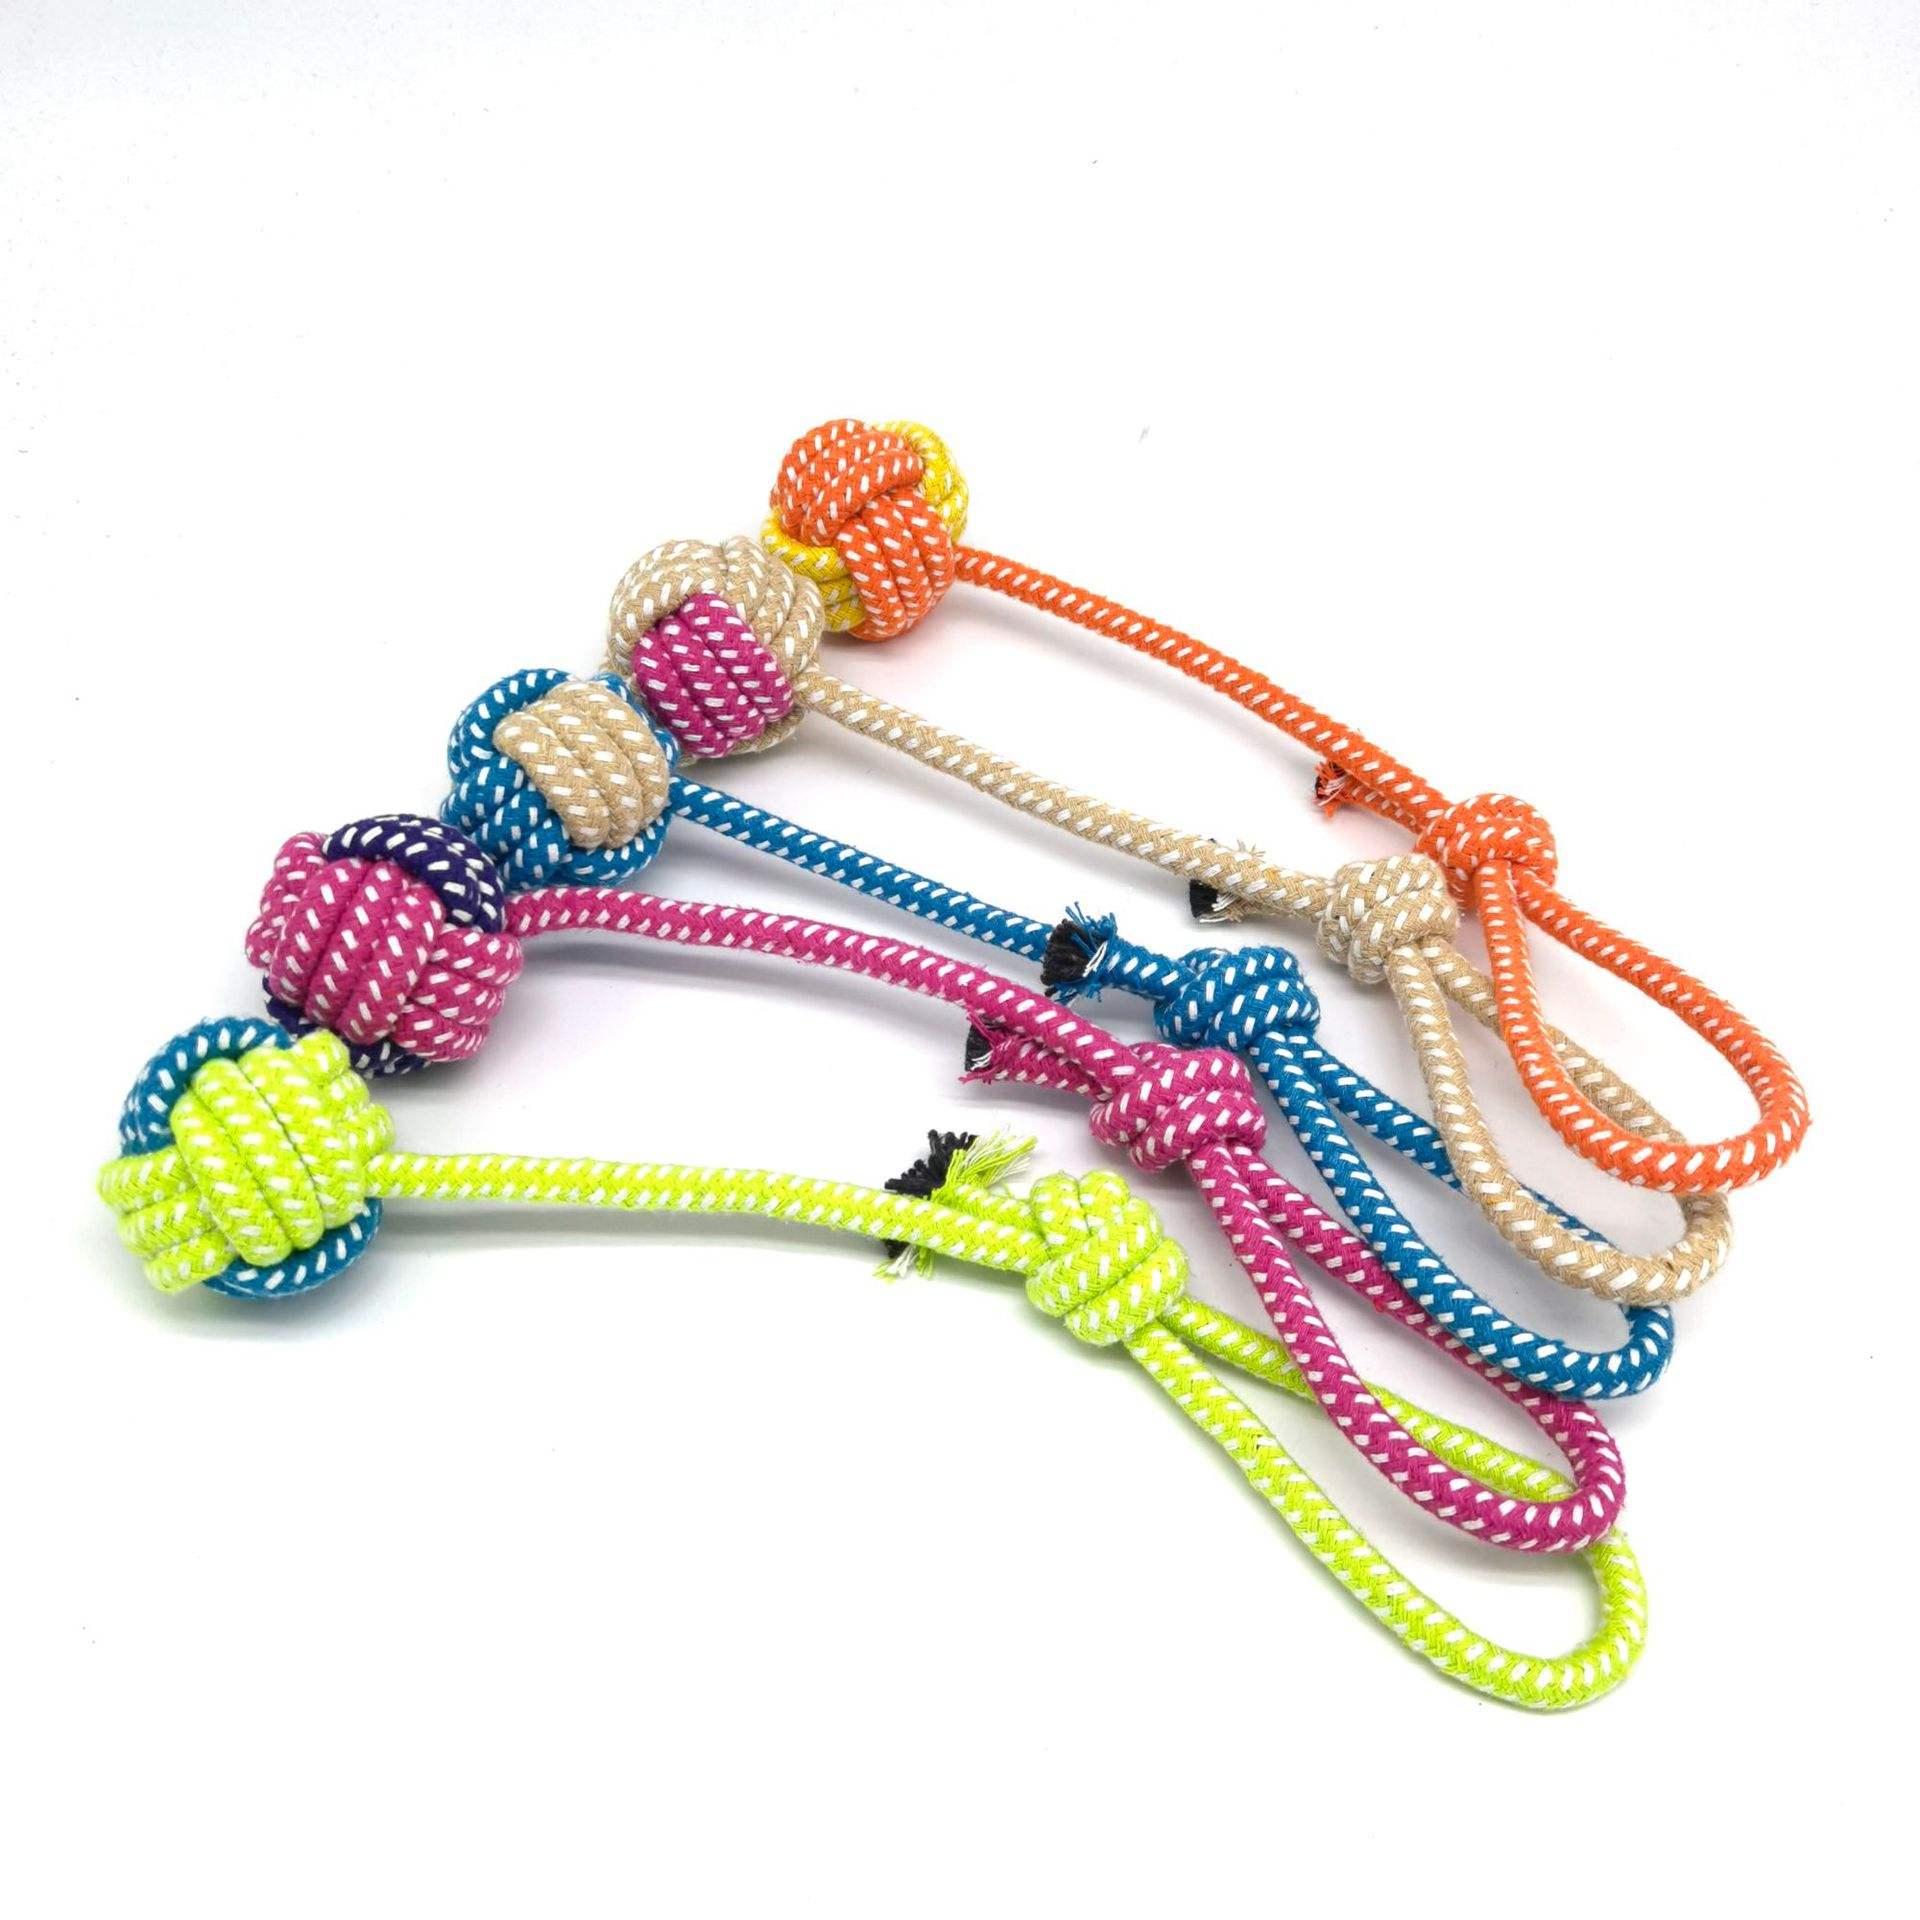 Pepper Rope Ball Toy